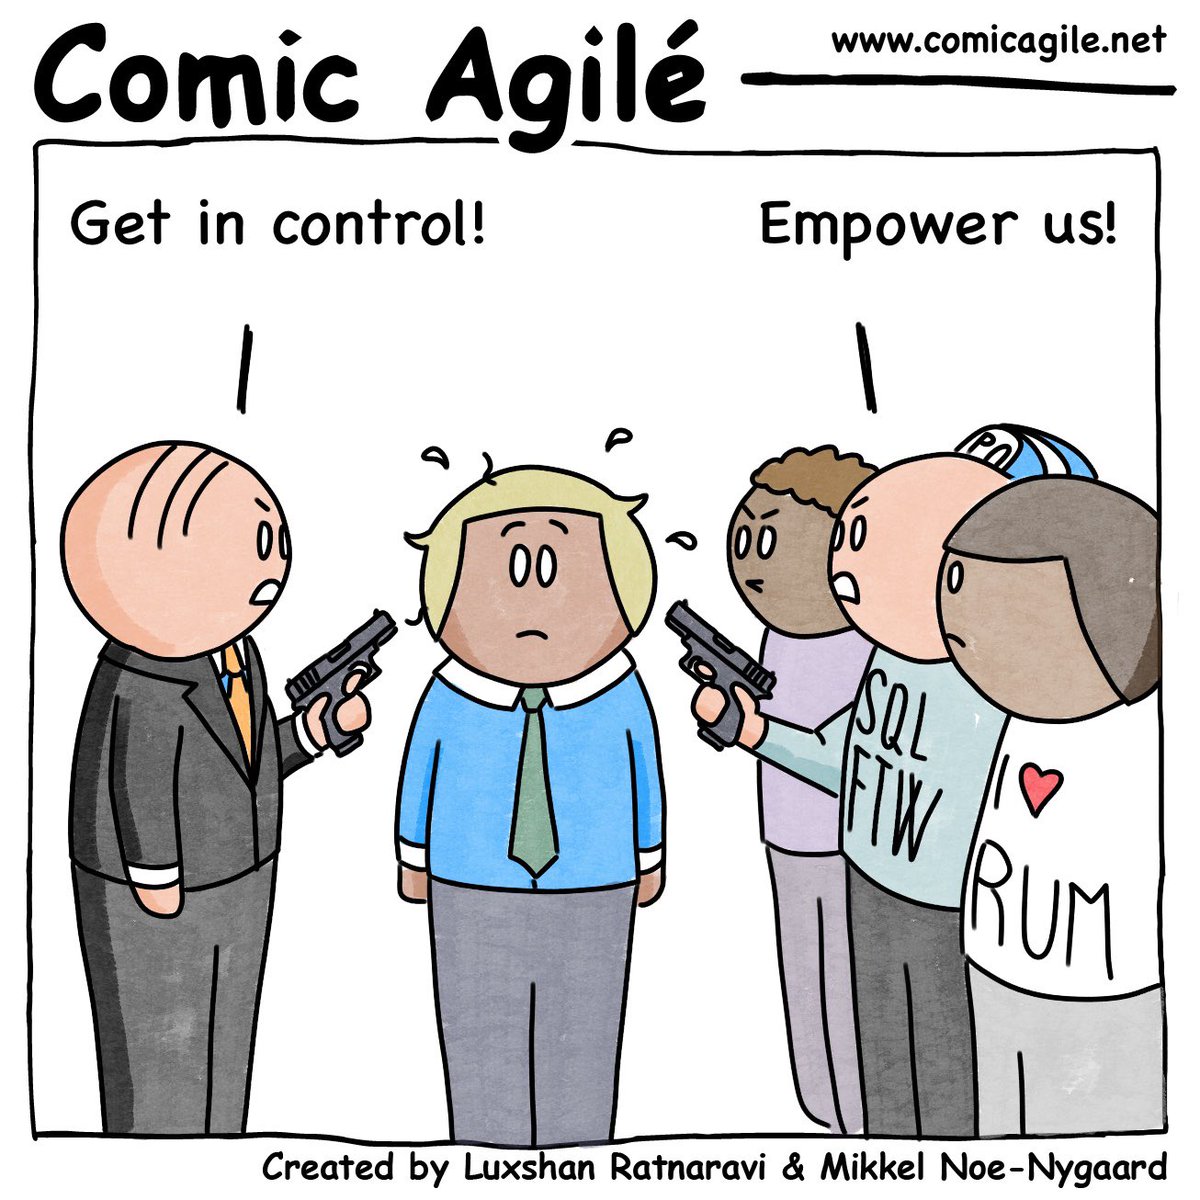 #ComicAgile no. 204 - The Middle Manager